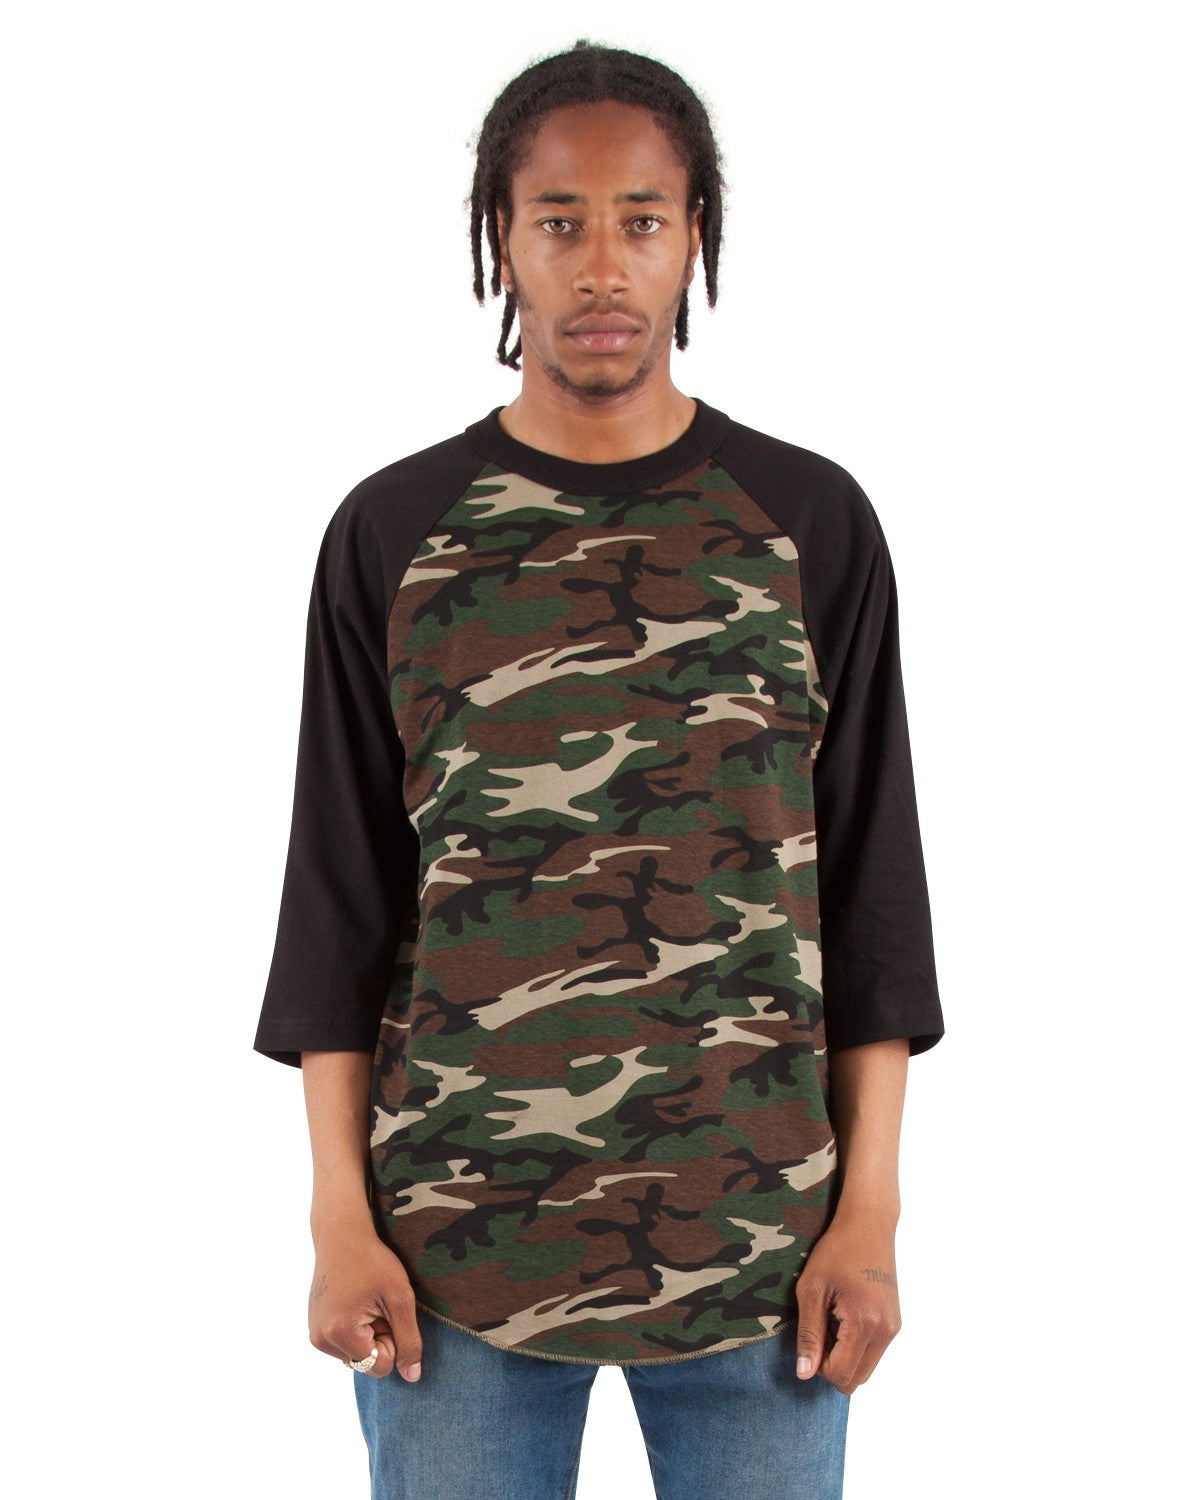 stole Ansøger sne Adult raglan Black T-shirt with Camo Sleeves – Lucky Wholesale